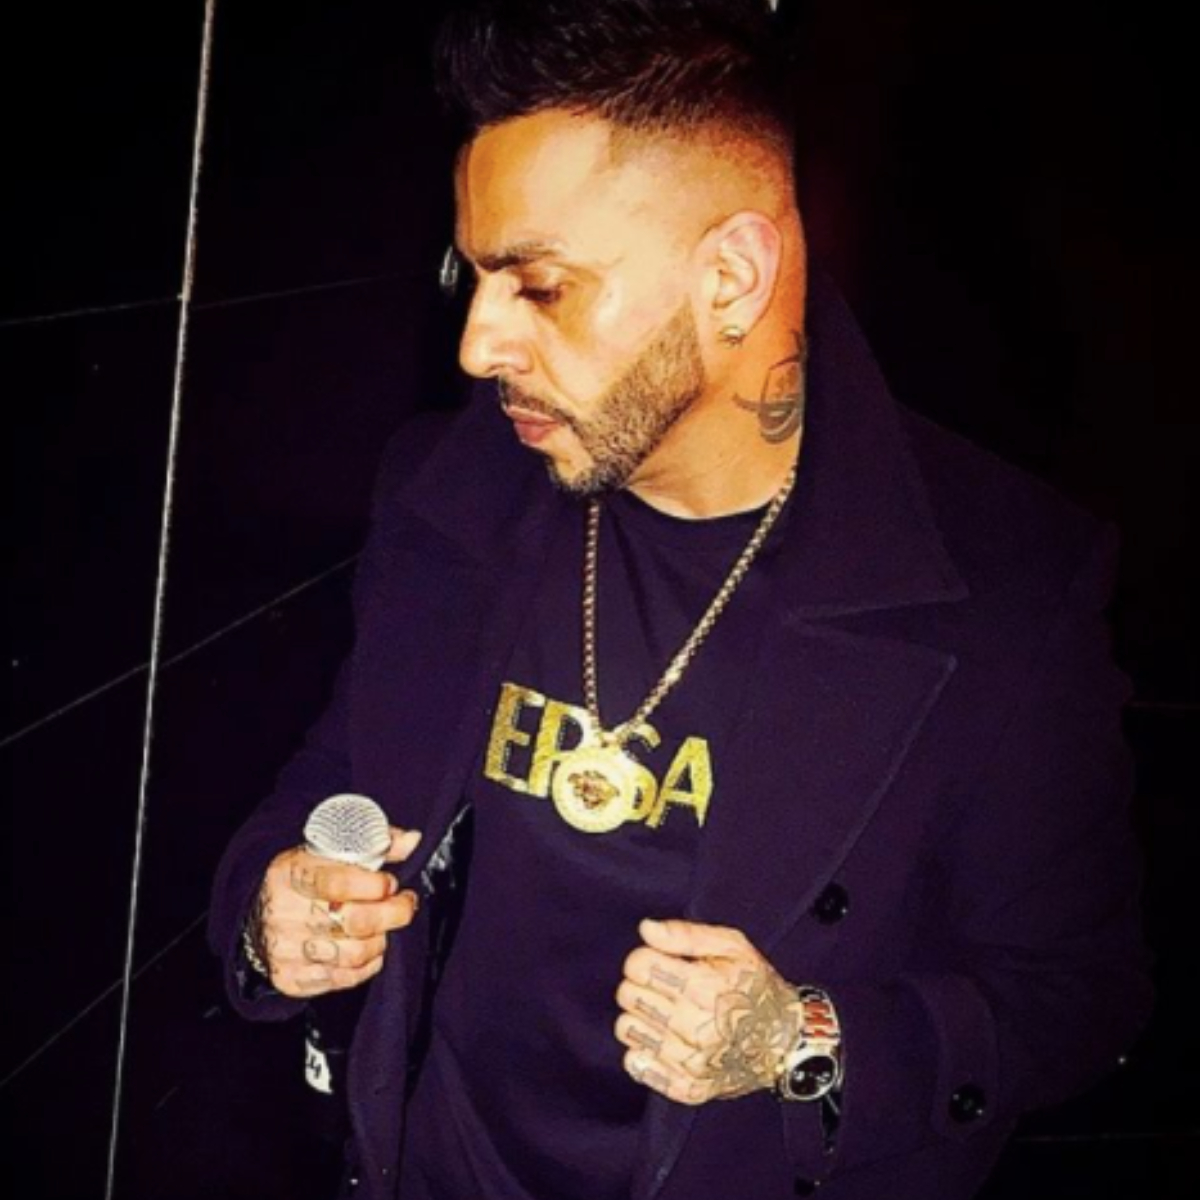 EXCLUSIVE: Juggy D arrested by London police for domestic violence yesterday?